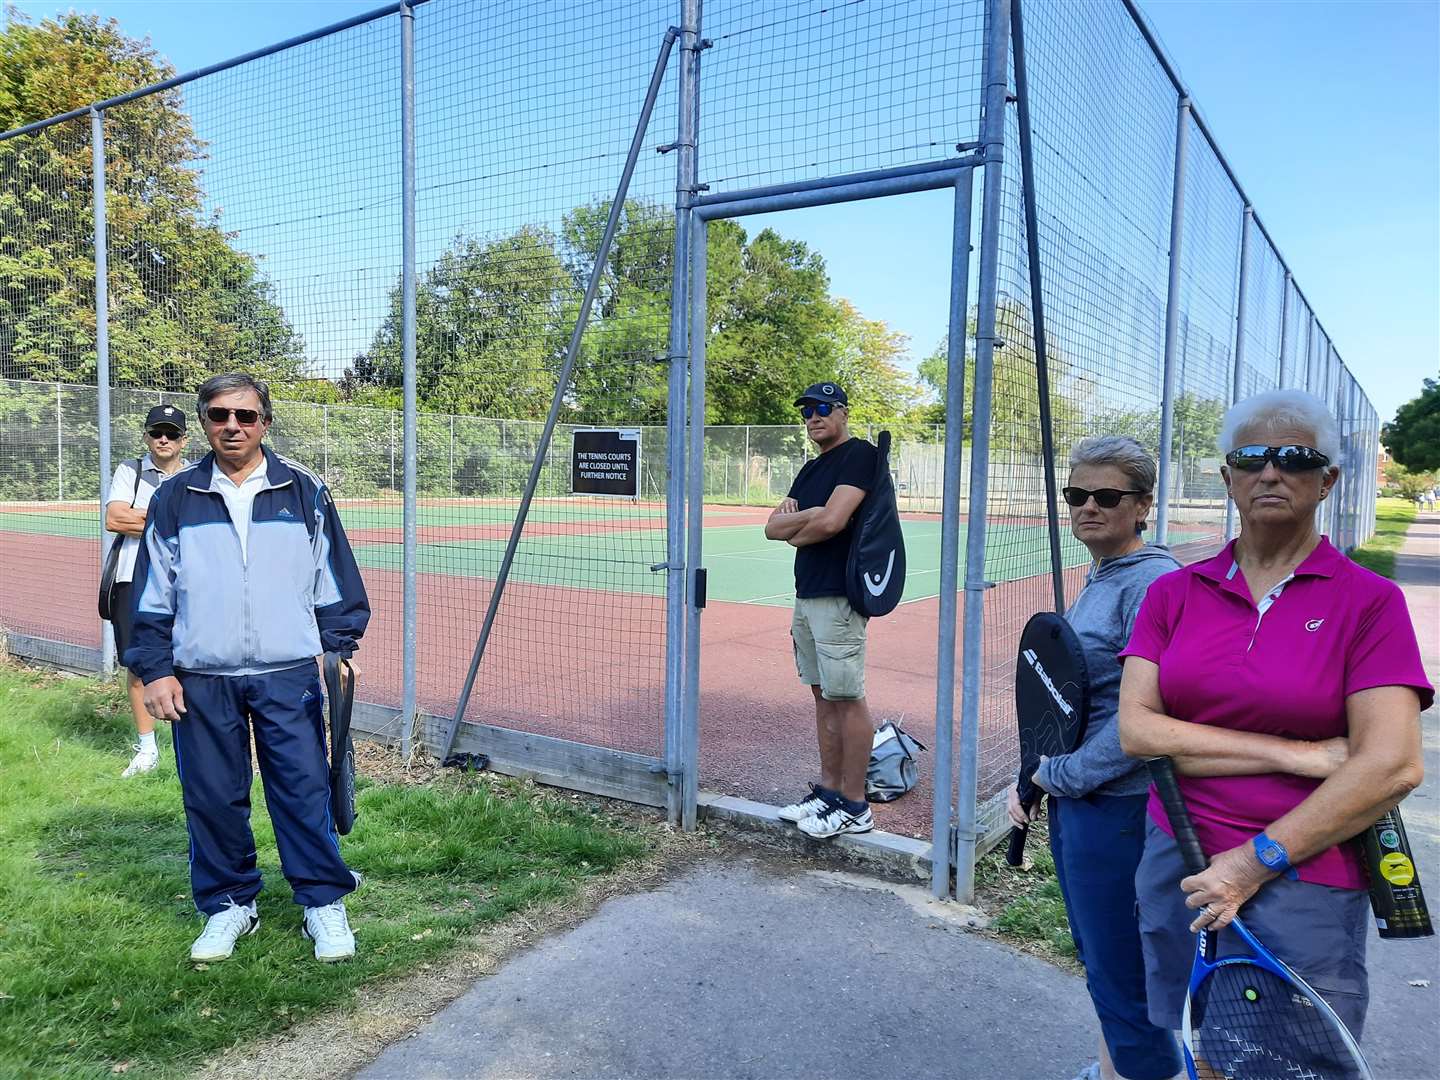 Residents are calling on the council to reverse its decision to close the tennis courts in Memorial Park, Herne Bay, and remove their nets